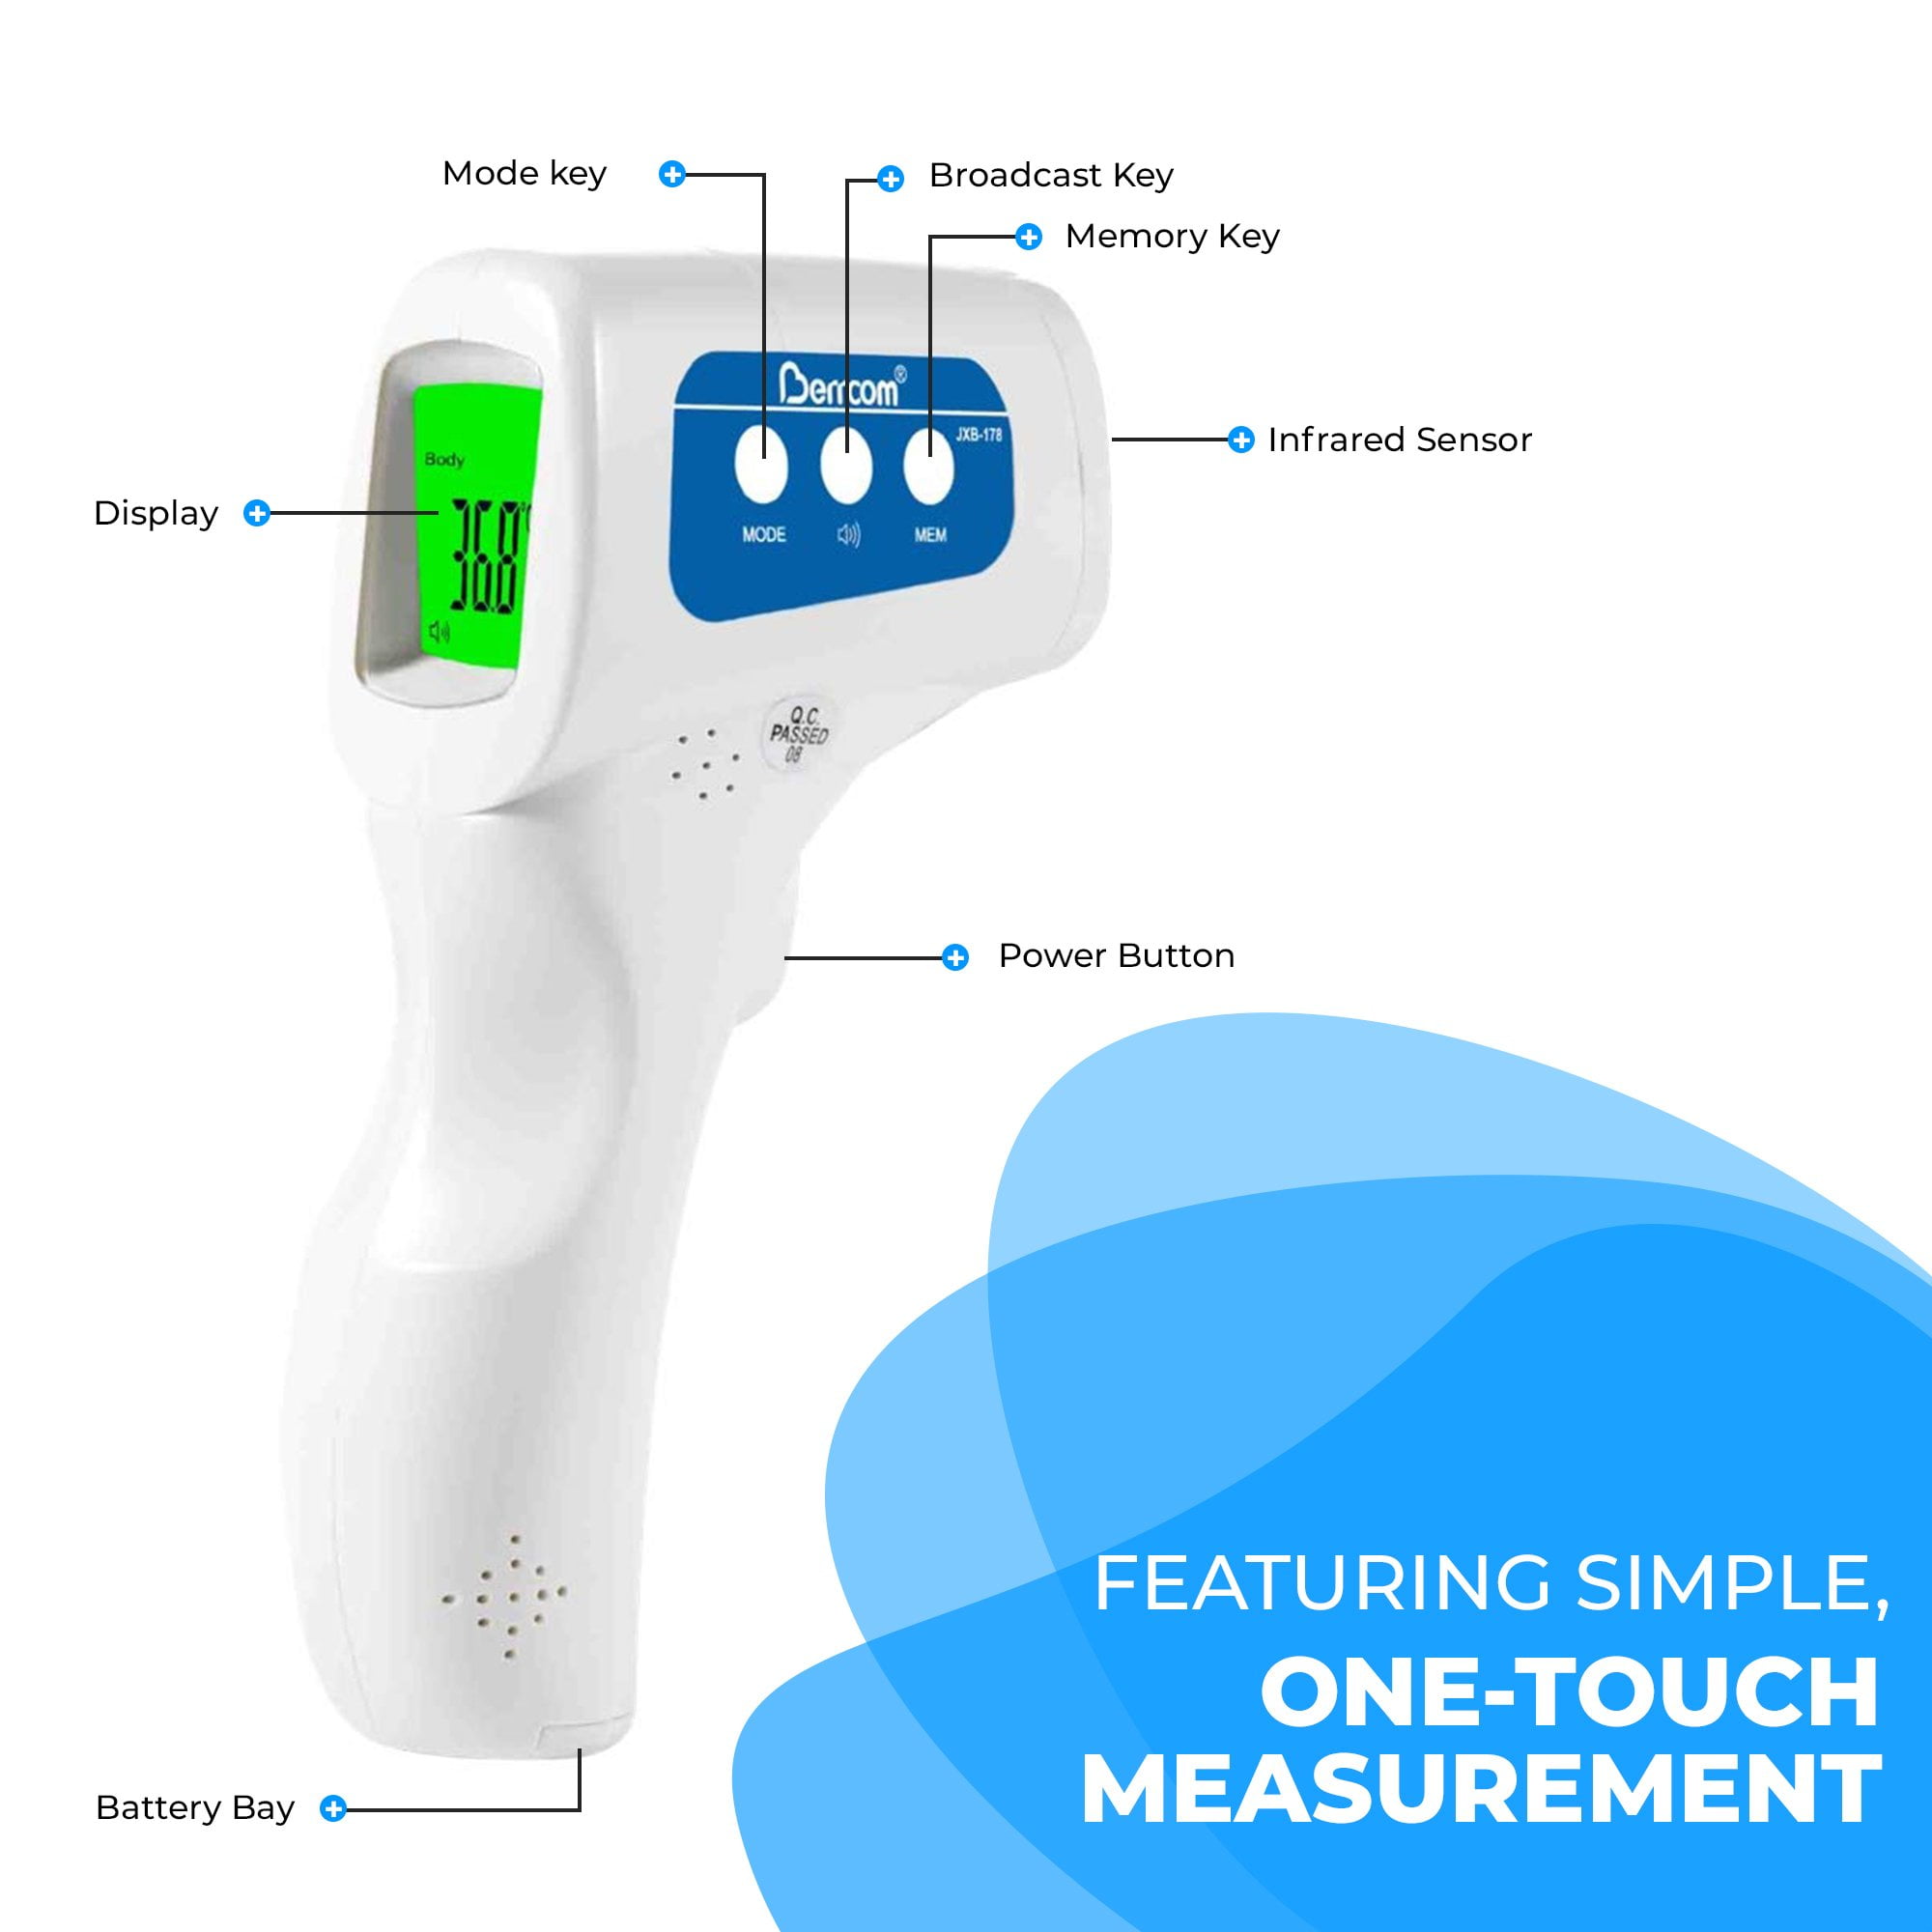 Non-contact Infrared Thermometer JXB-178. Термометр Berrcom JXB-178. Non-contact Infrared Thermometer модель JXB-178. Термометр инфракрасный JXB-178.